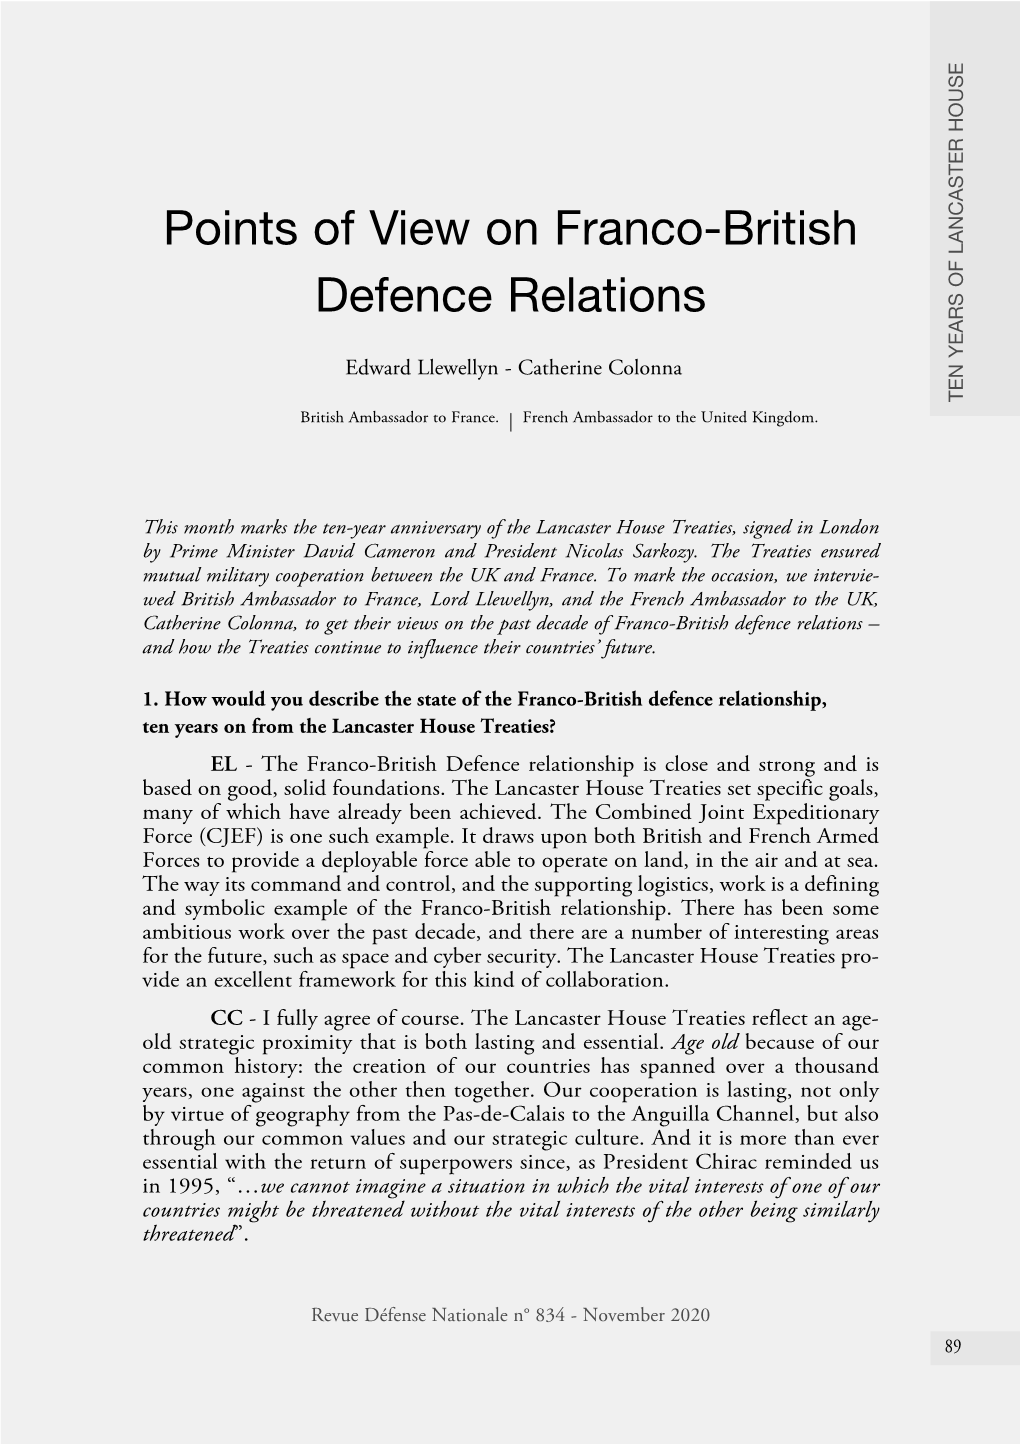 Points of View on Franco-British Defence Relations